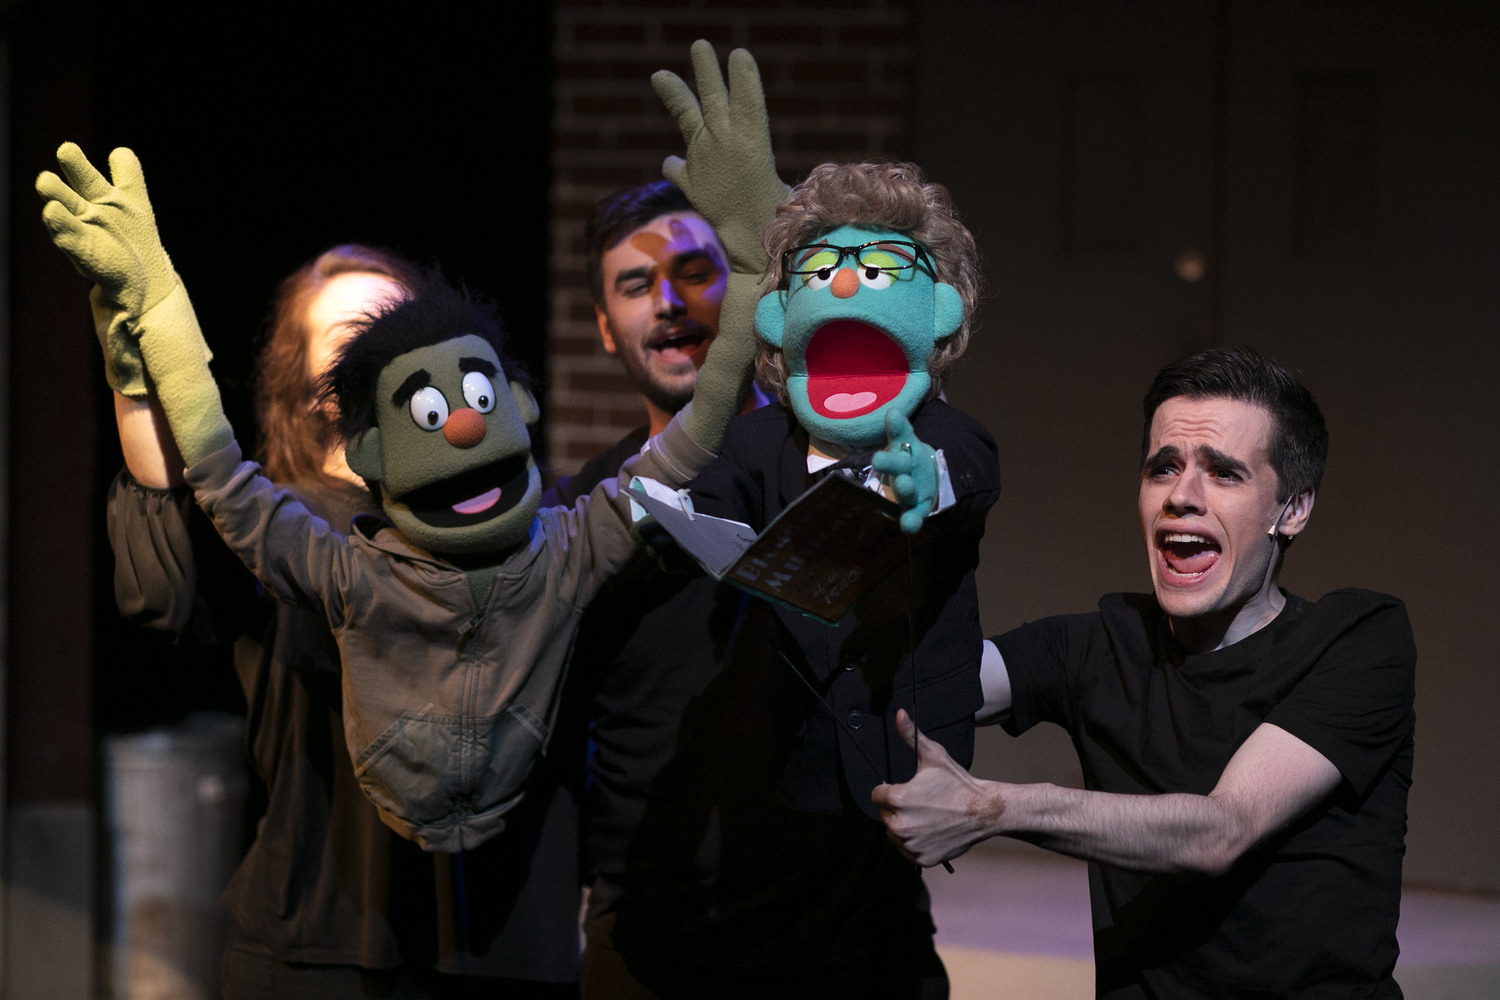 Scenes from the Toto Too production of Avenue Q at The Gladstone Theatre, Ottawa. Photos by Maria Vartanova 3